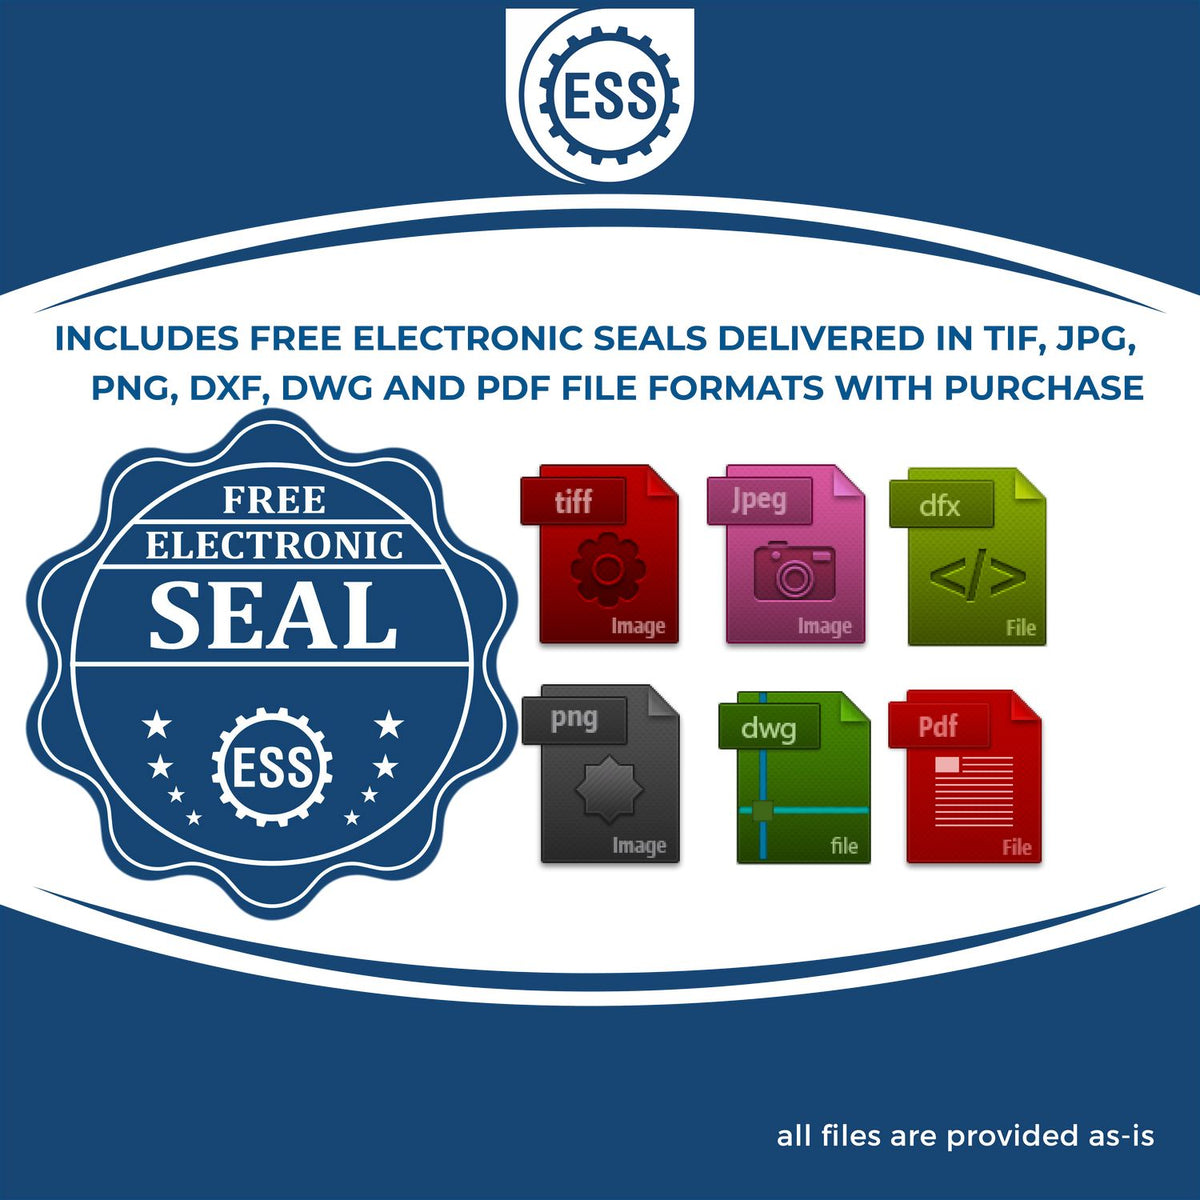 An infographic for the free electronic seal for the Rhode Island Professional Engineer Seal Stamp illustrating the different file type icons such as DXF, DWG, TIF, JPG and PNG.